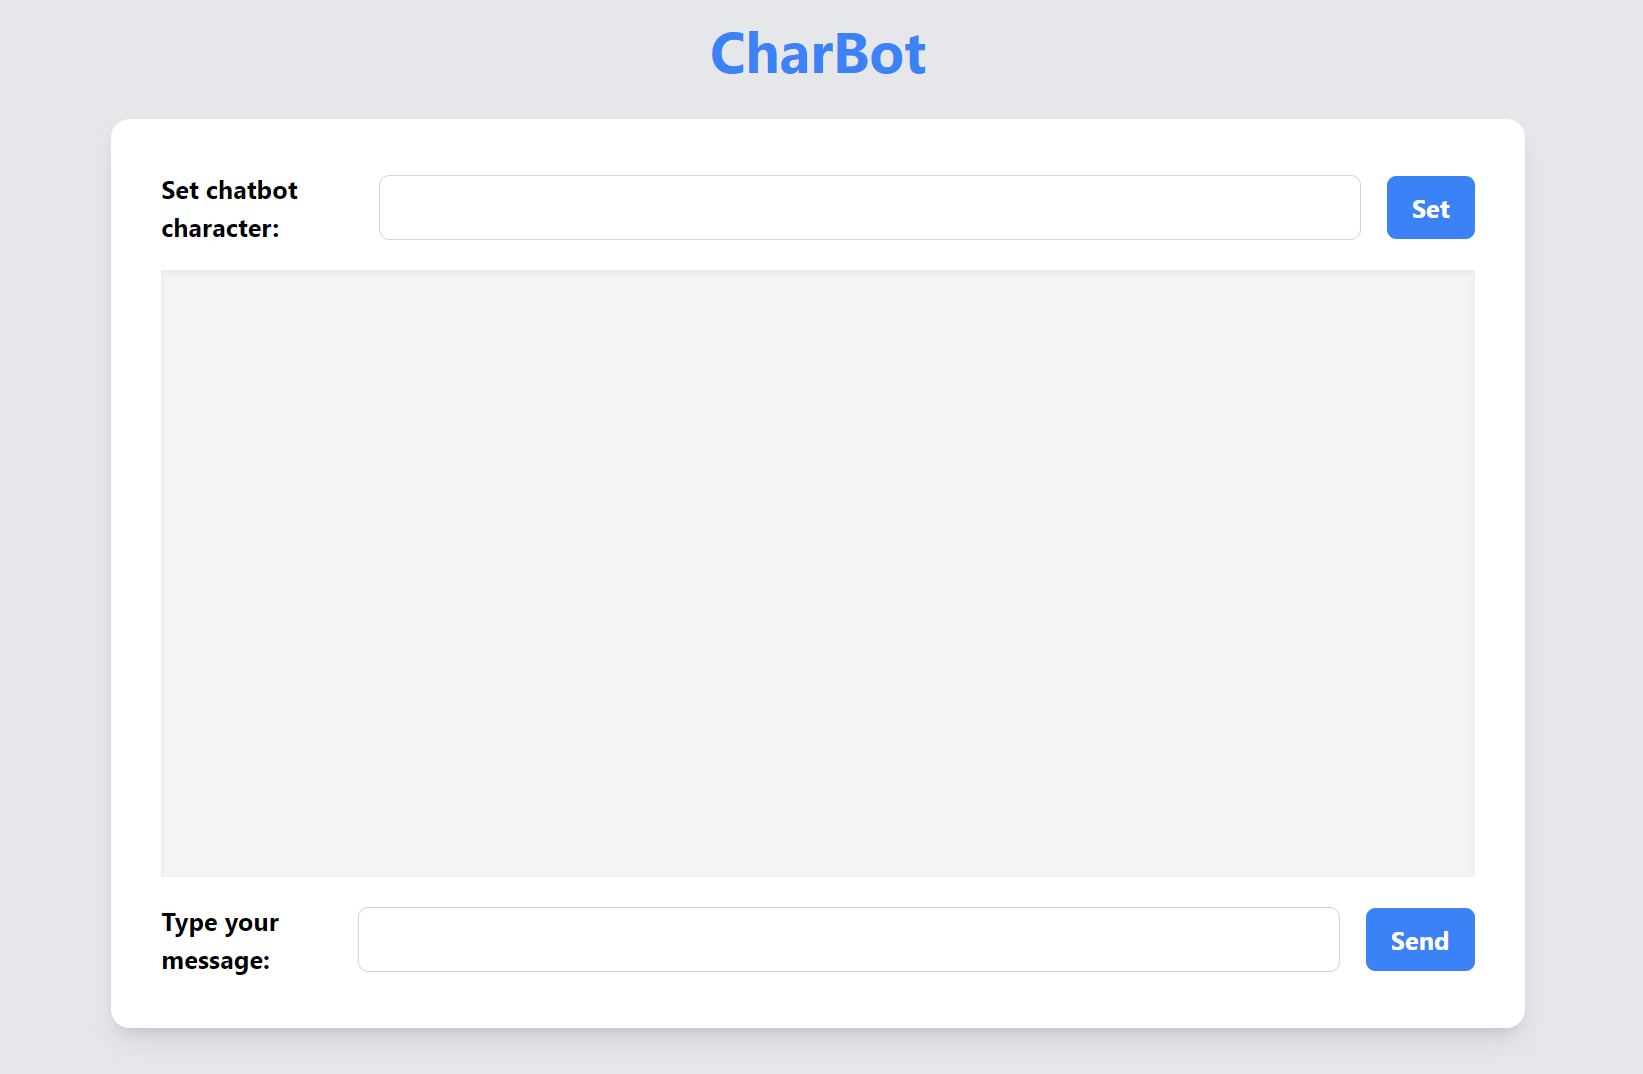 The user interface for our CharBot app